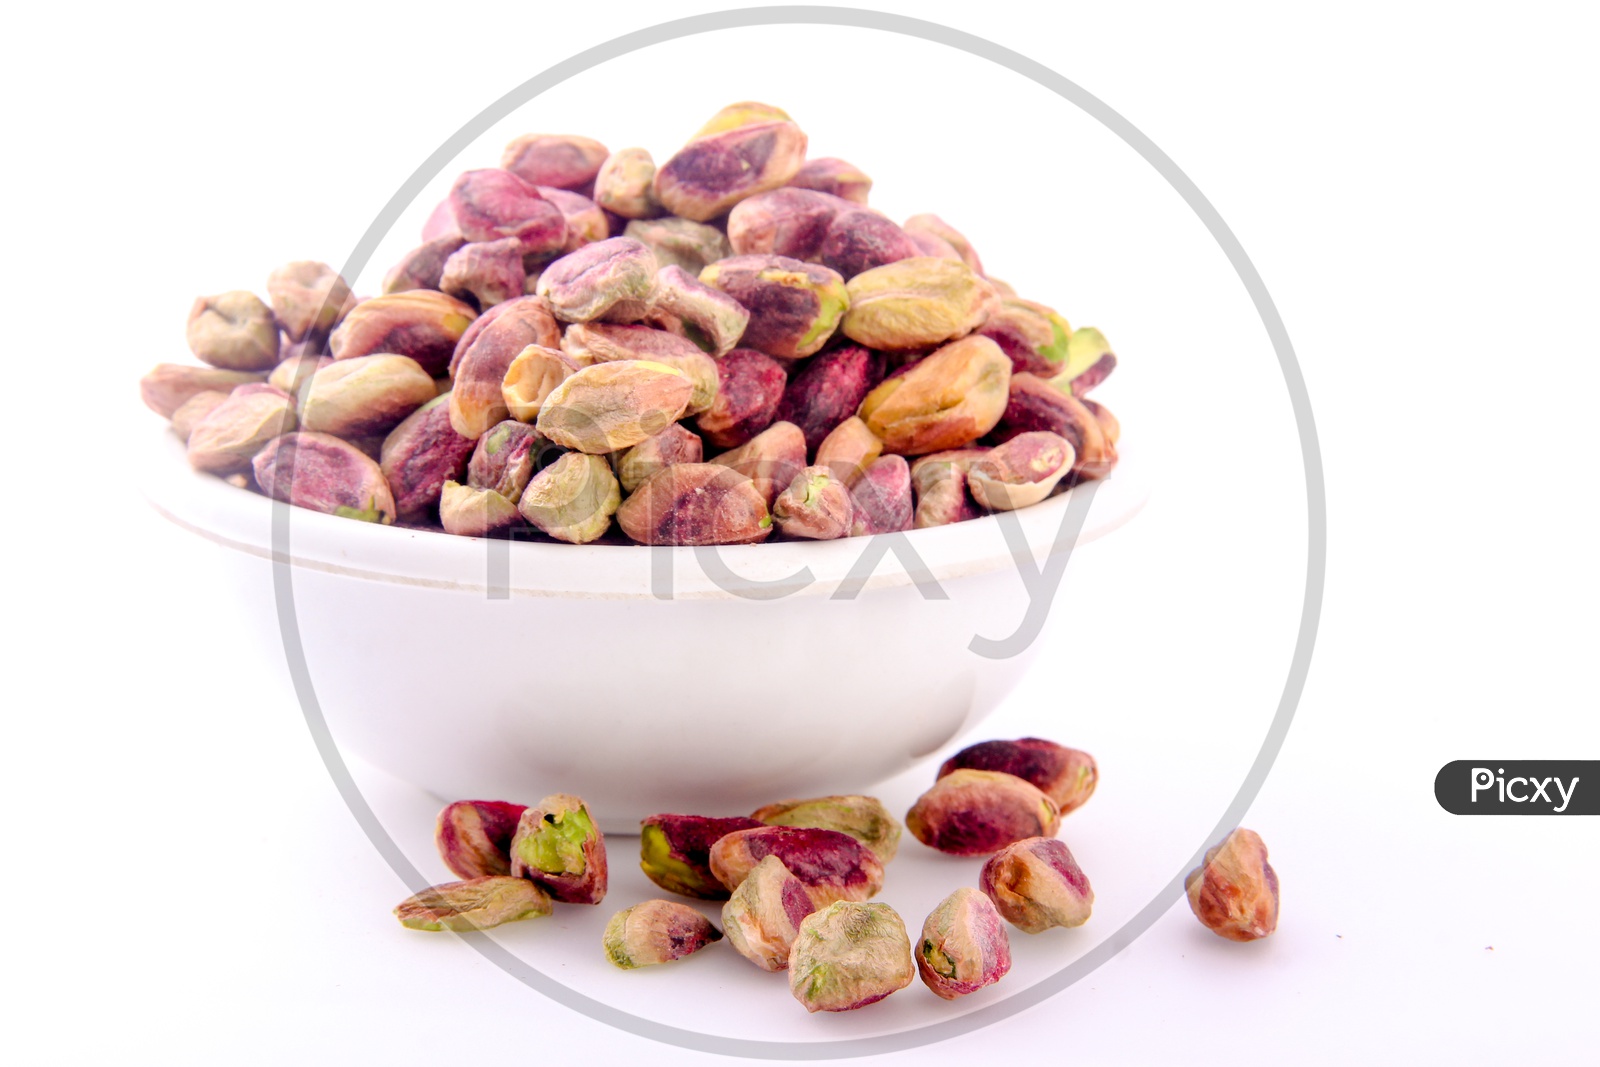 Pista/Pistachio/ Pistachios No Shell/ in Bowl Isolated in White Background